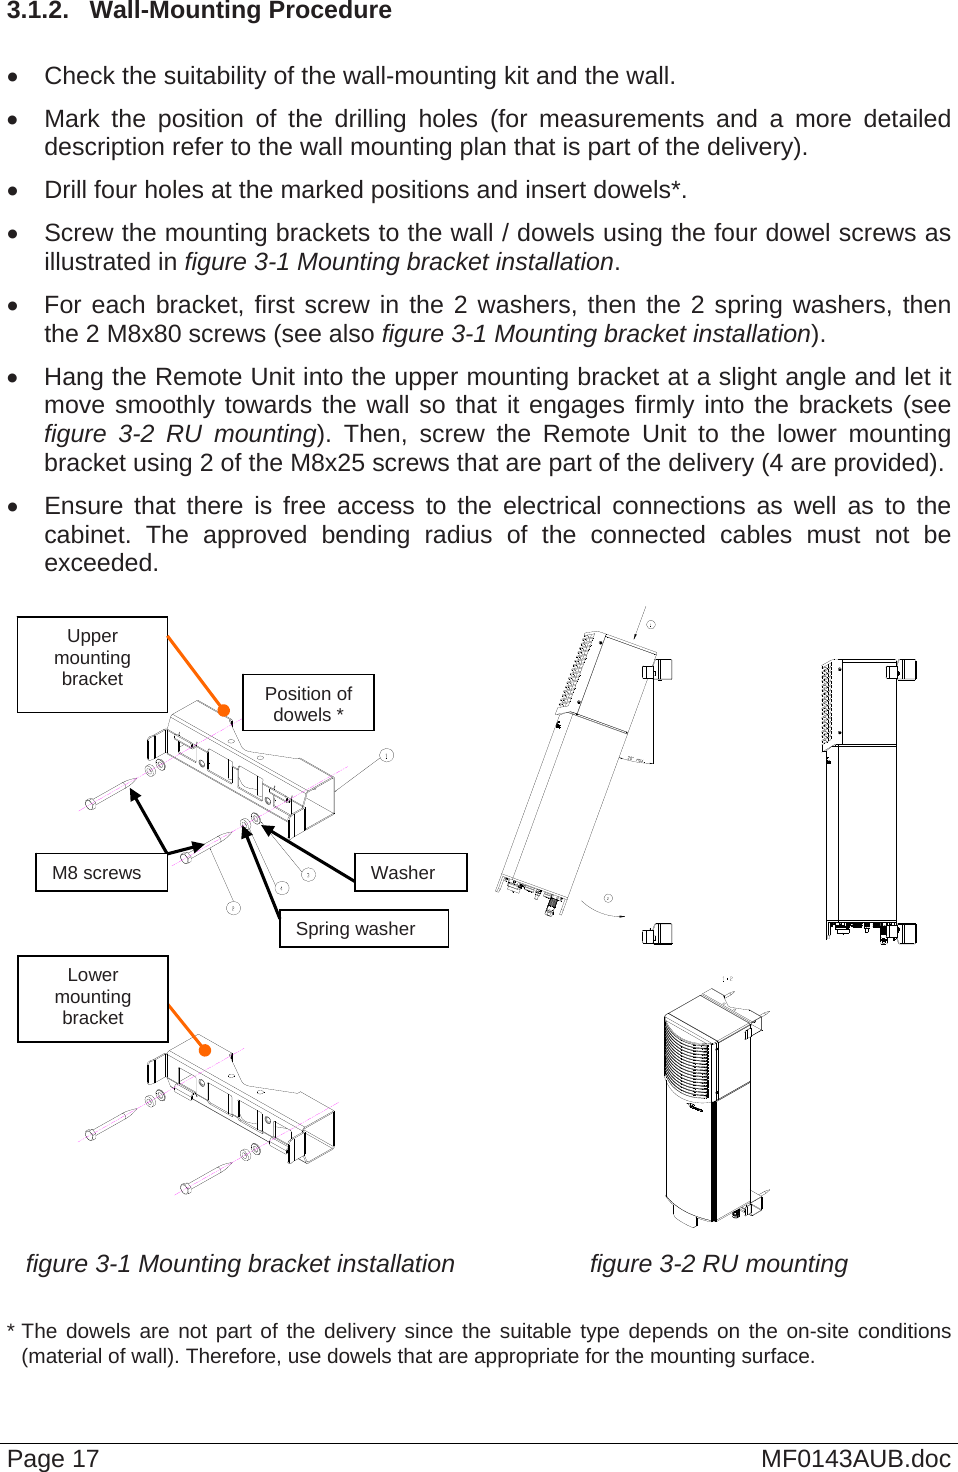  3.1.2.  Wall-Mounting Procedure    Check the suitability of the wall-mounting kit and the wall.   Mark the position of the drilling holes (for measurements and a more detailed description refer to the wall mounting plan that is part of the delivery).    Drill four holes at the marked positions and insert dowels*.   Screw the mounting brackets to the wall / dowels using the four dowel screws as illustrated in figure 3-1 Mounting bracket installation.   For each bracket, first screw in the 2 washers, then the 2 spring washers, then the 2 M8x80 screws (see also figure 3-1 Mounting bracket installation).   Hang the Remote Unit into the upper mounting bracket at a slight angle and let it move smoothly towards the wall so that it engages firmly into the brackets (see figure 3-2 RU mounting). Then, screw the Remote Unit to the lower mounting bracket using 2 of the M8x25 screws that are part of the delivery (4 are provided).   Ensure that there is free access to the electrical connections as well as to the cabinet. The approved bending radius of the connected cables must not be exceeded.       figure 3-1 Mounting bracket installation figure 3-2 RU mounting Upper mounting bracket Page 17  MF0143AUB.doc  * The dowels are not part of the delivery since the suitable type depends on the on-site conditions (material of wall). Therefore, use dowels that are appropriate for the mounting surface. M8 screws Spring washerWasherPosition of dowels * Lower mounting bracket 